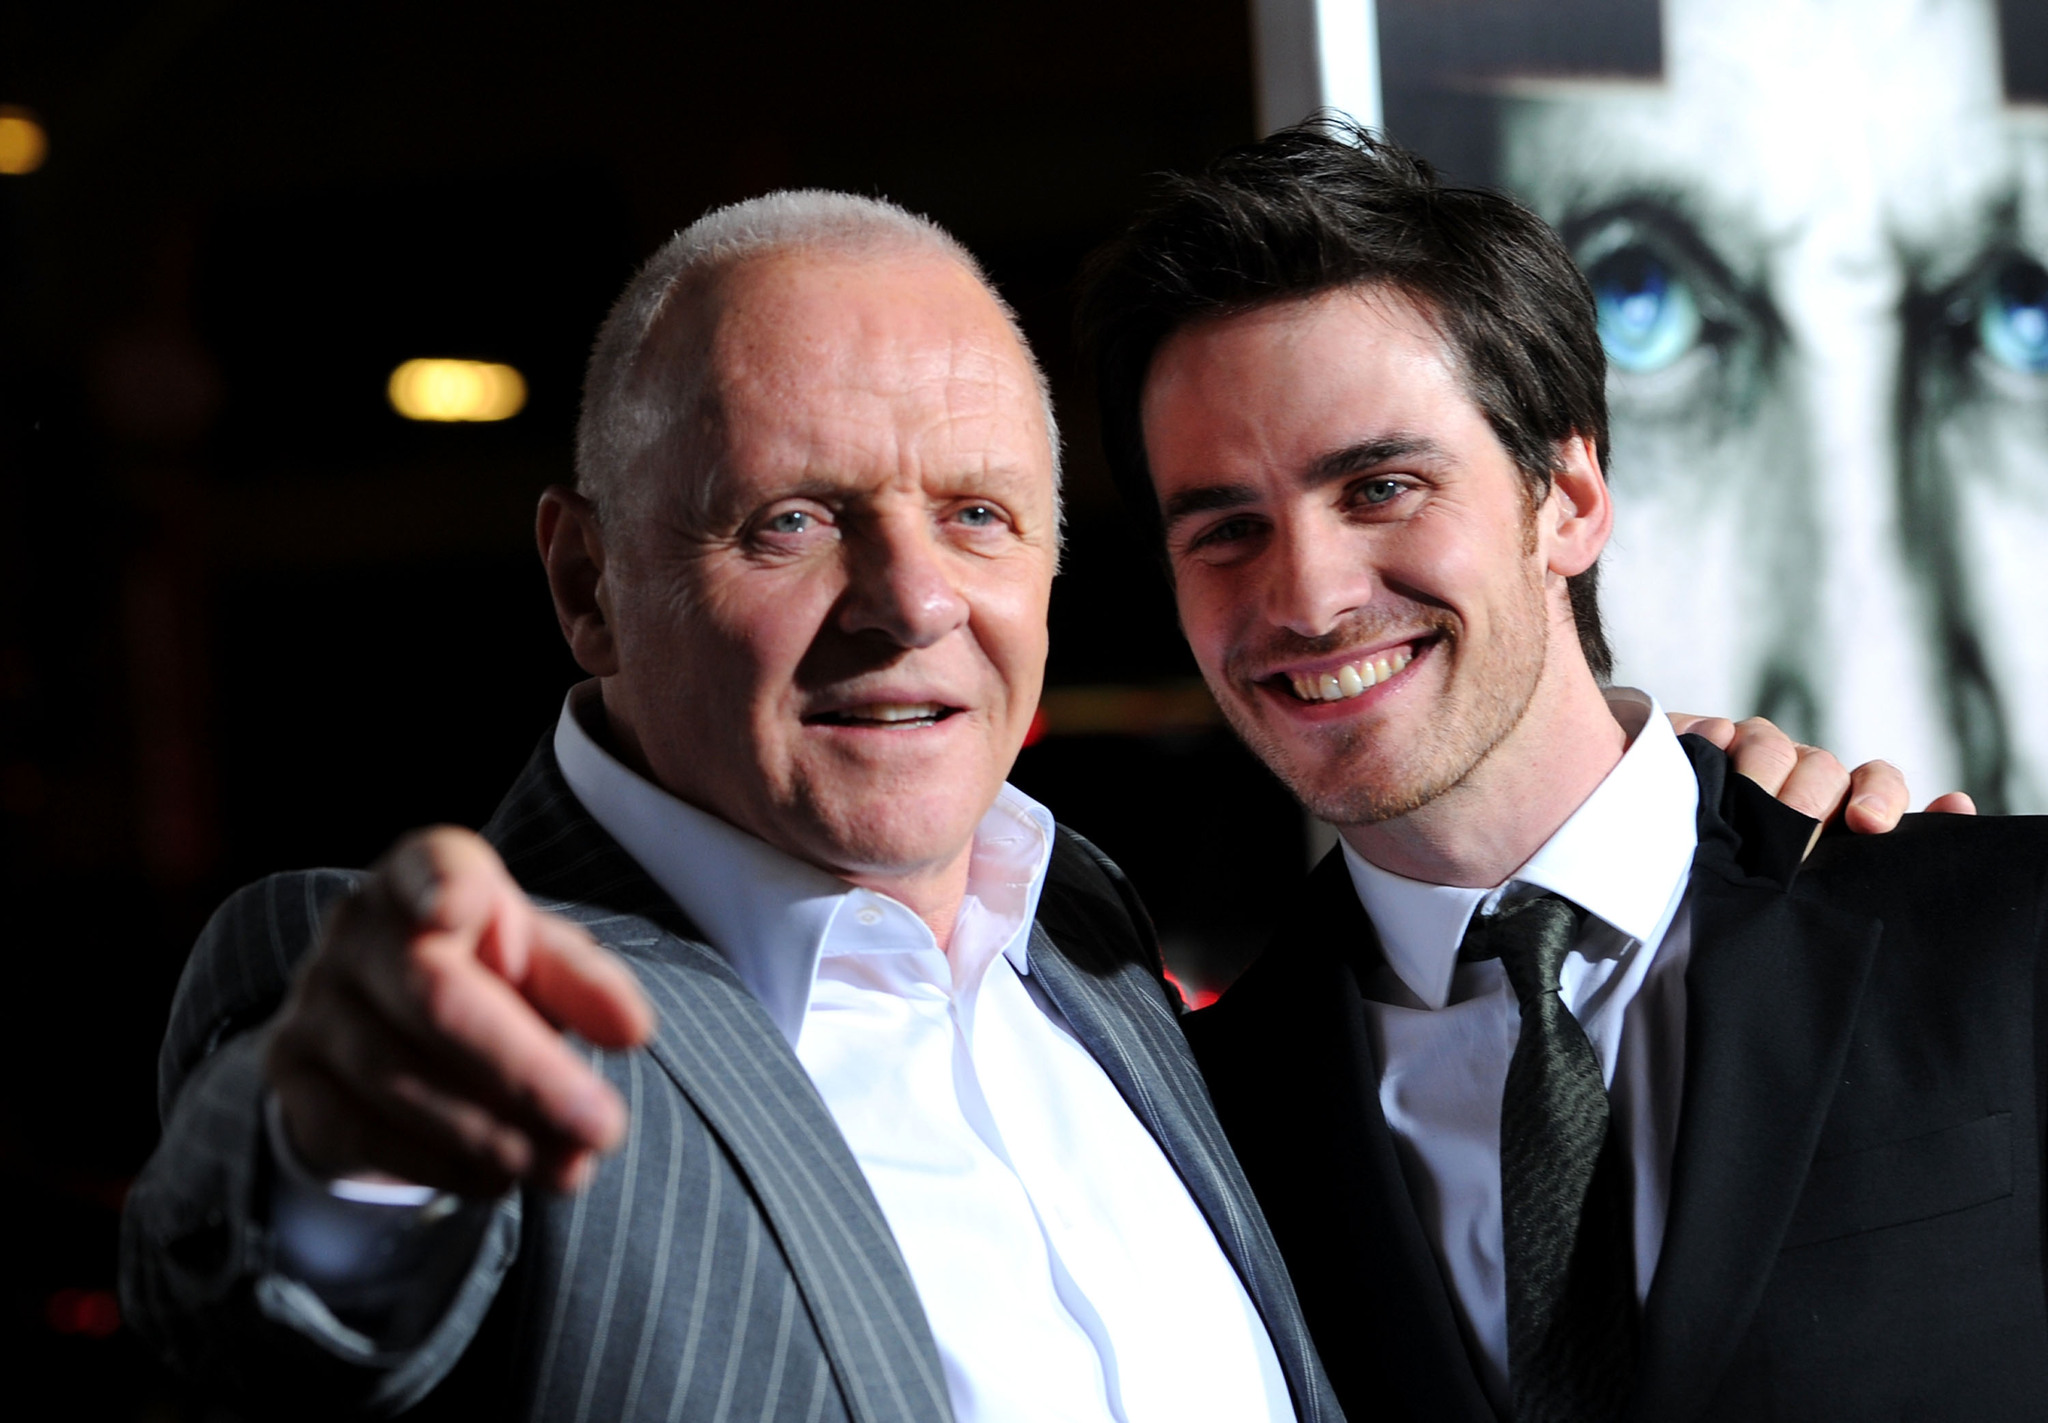 Anthony Hopkins and Colin O'Donoghue at event of Egzorcizmas (2011)